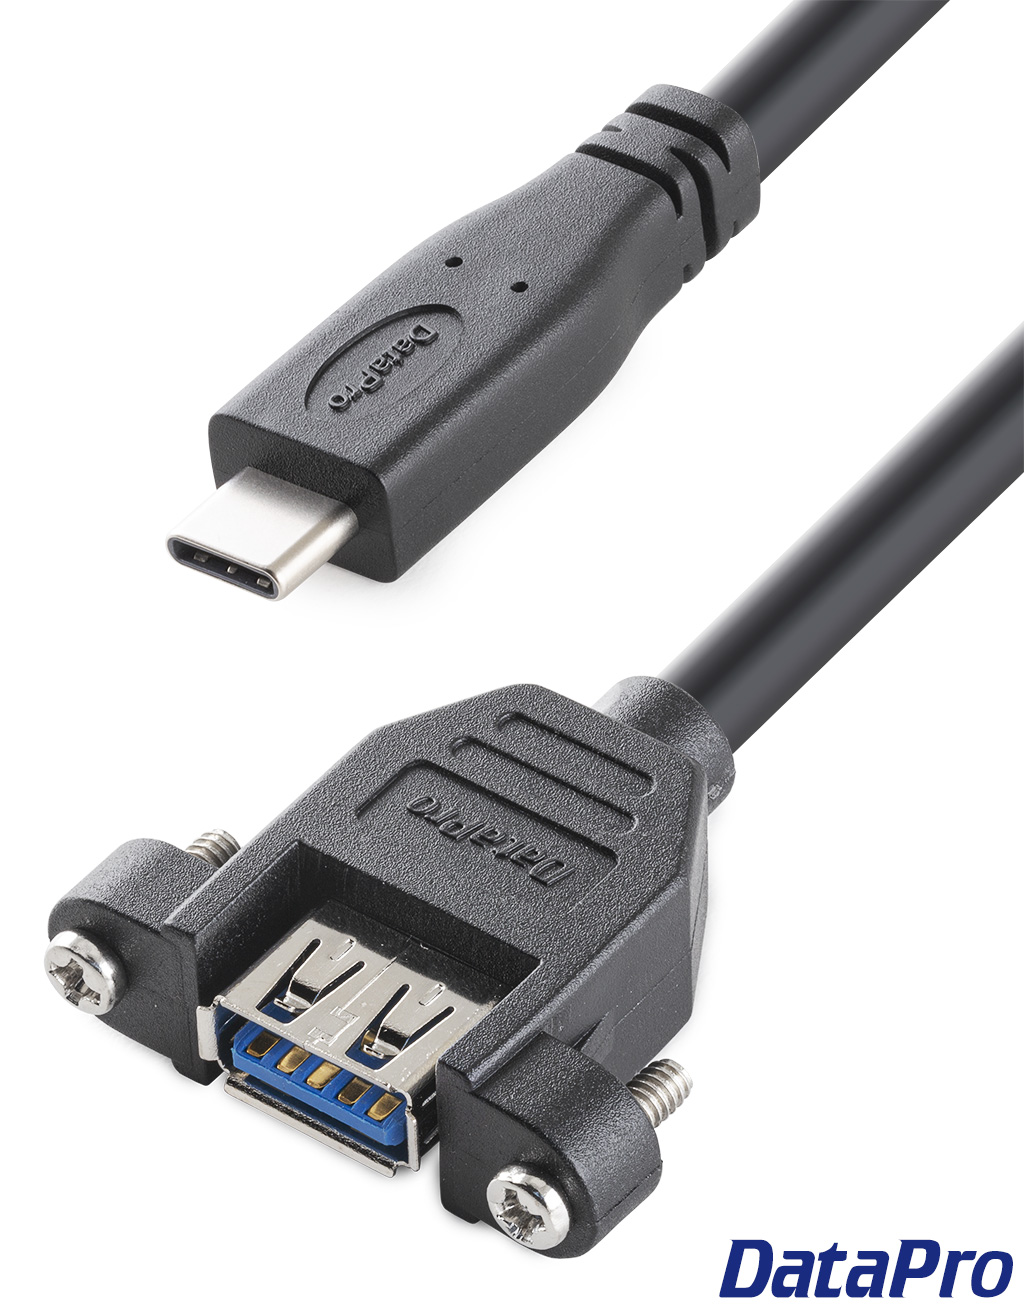 USB-C to C Fiber Optic Cables (USB 3.1 Type C to Type C Cables)